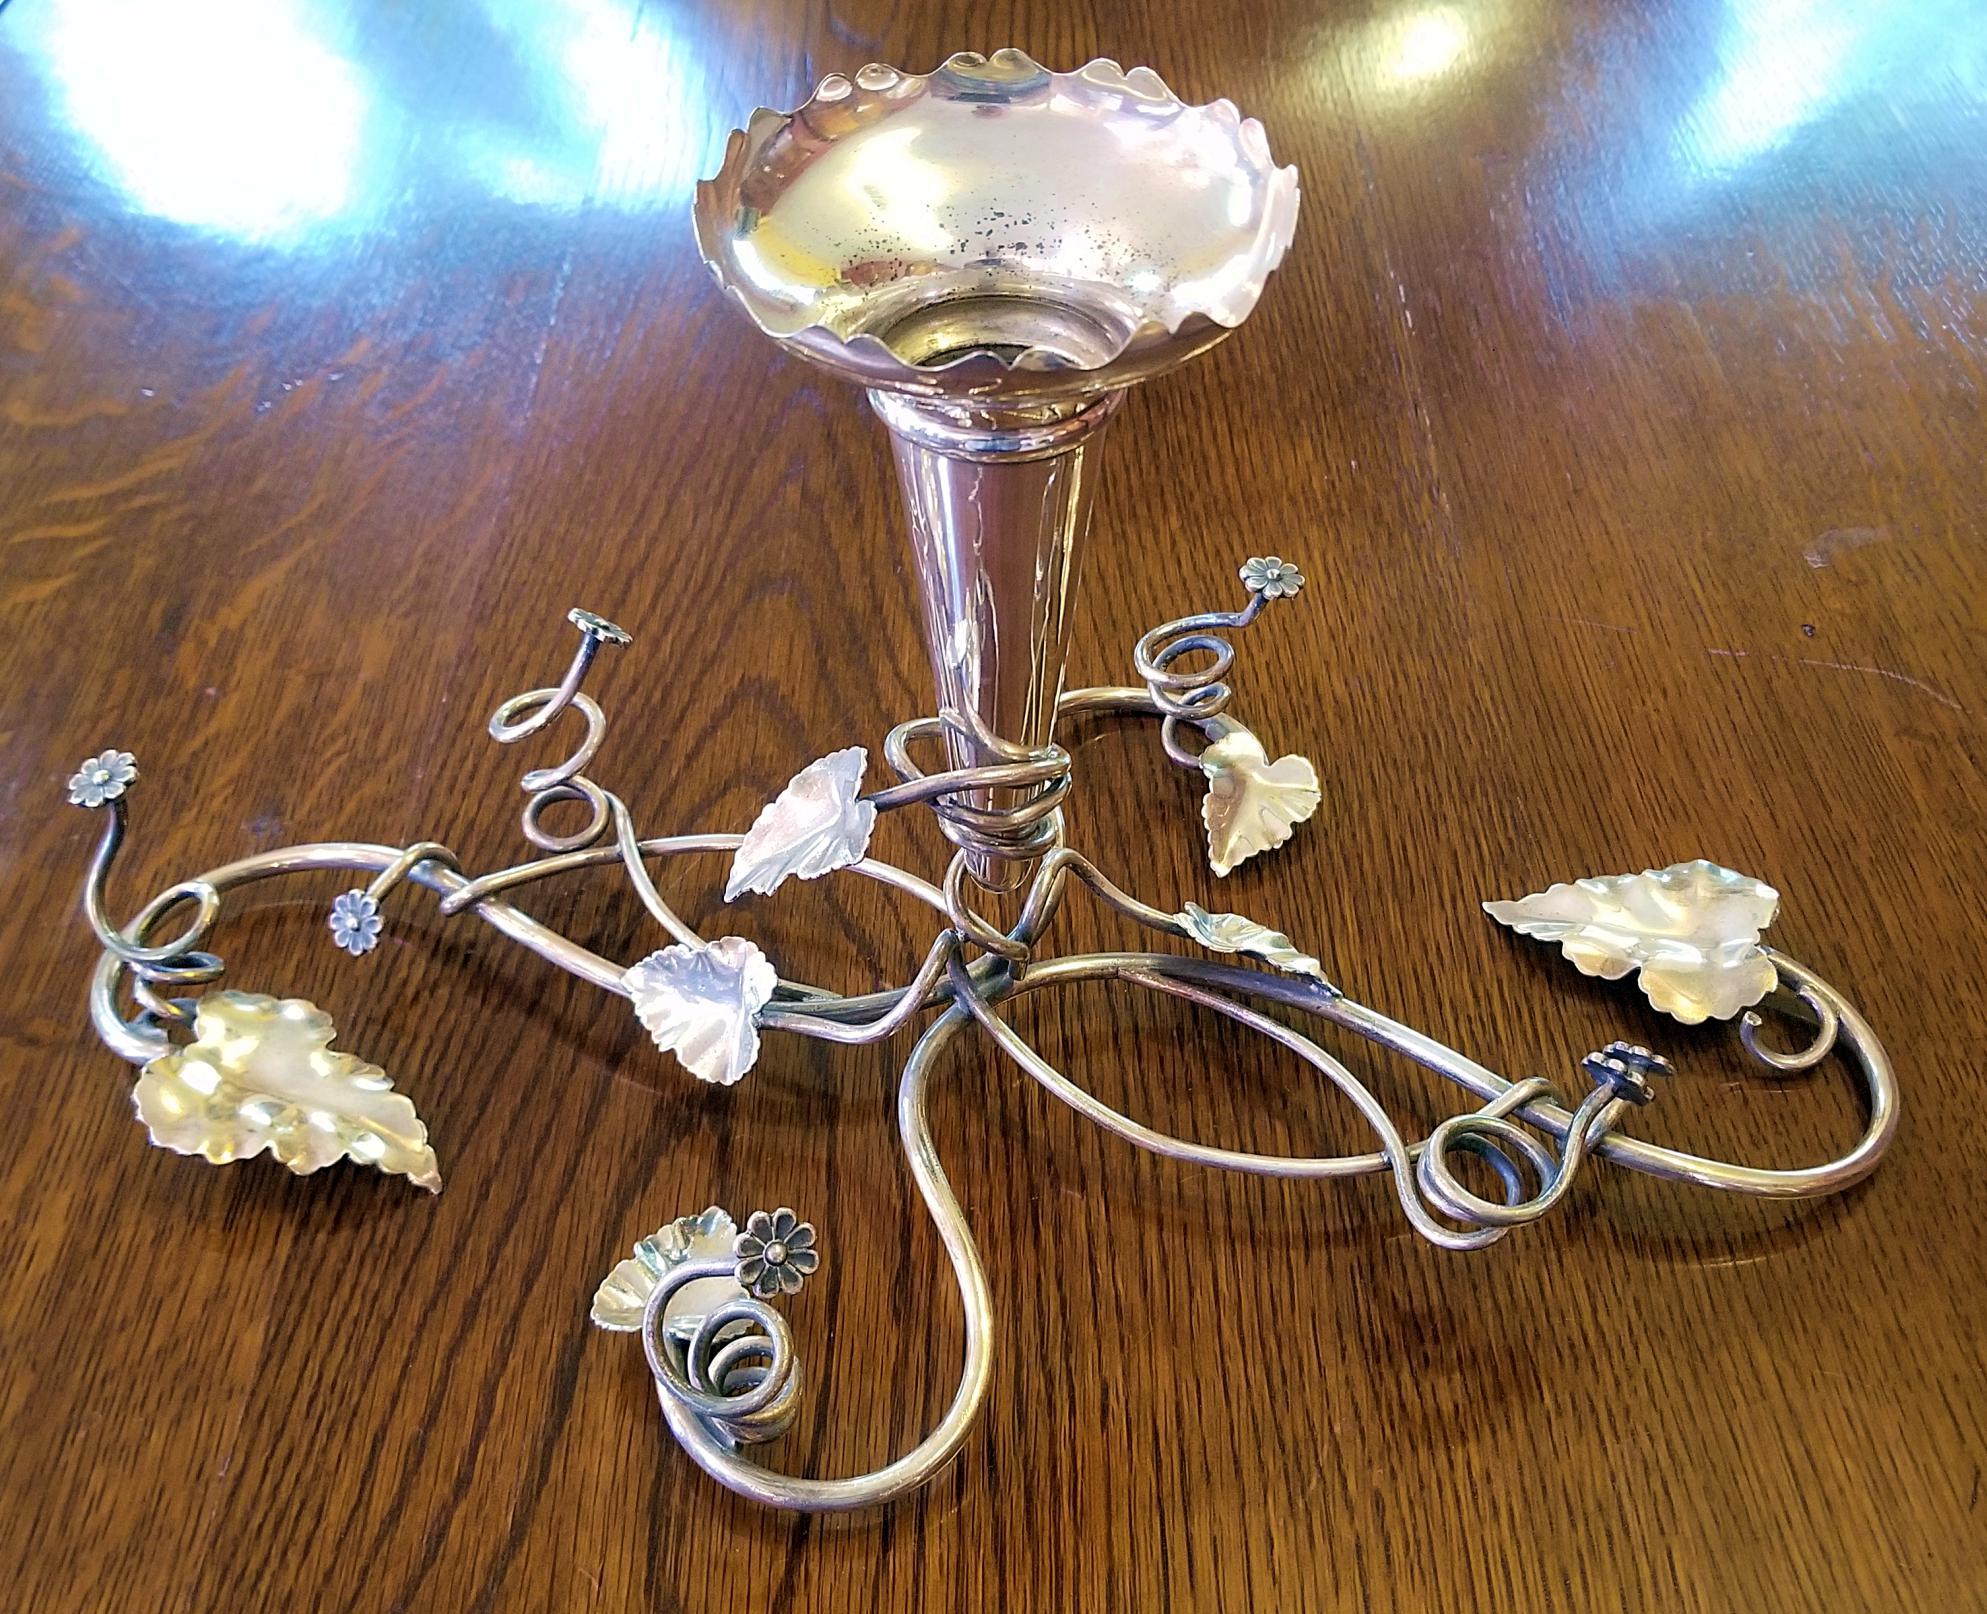 Hand-Crafted 19th Century British Art Nouveau Old Sheffield Plated Silver Epergne